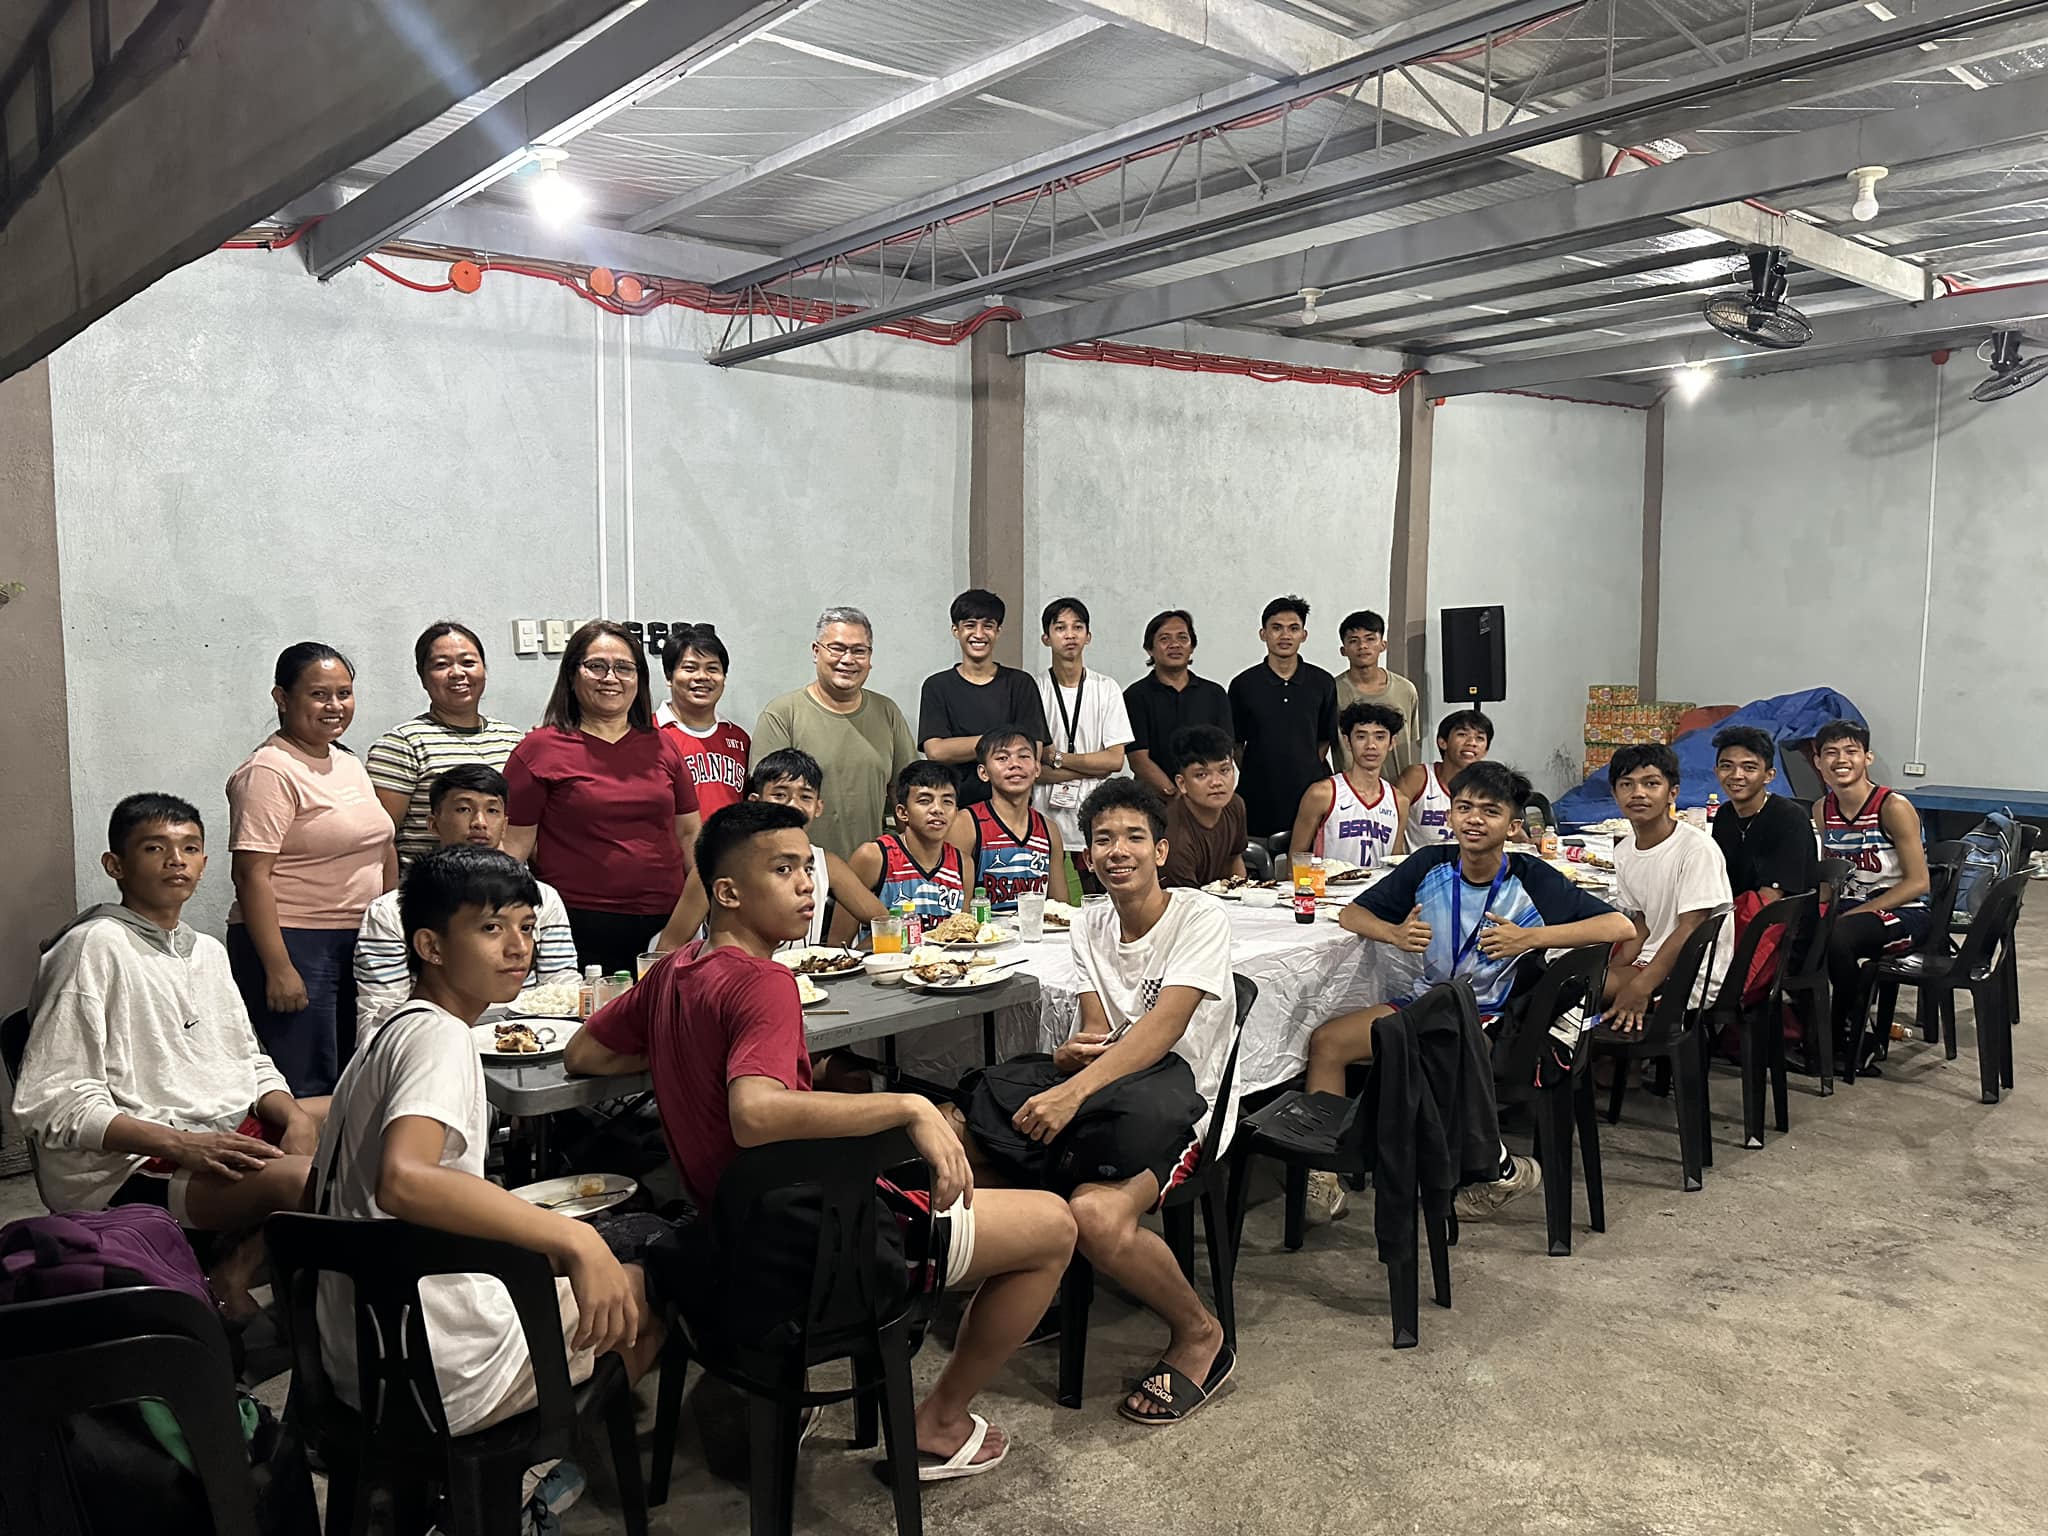 CHAMPIONSHIP DINNER with the Bacolod City Division Athletic Meet Basketball Champion Team – Atty. Caesar Distrito